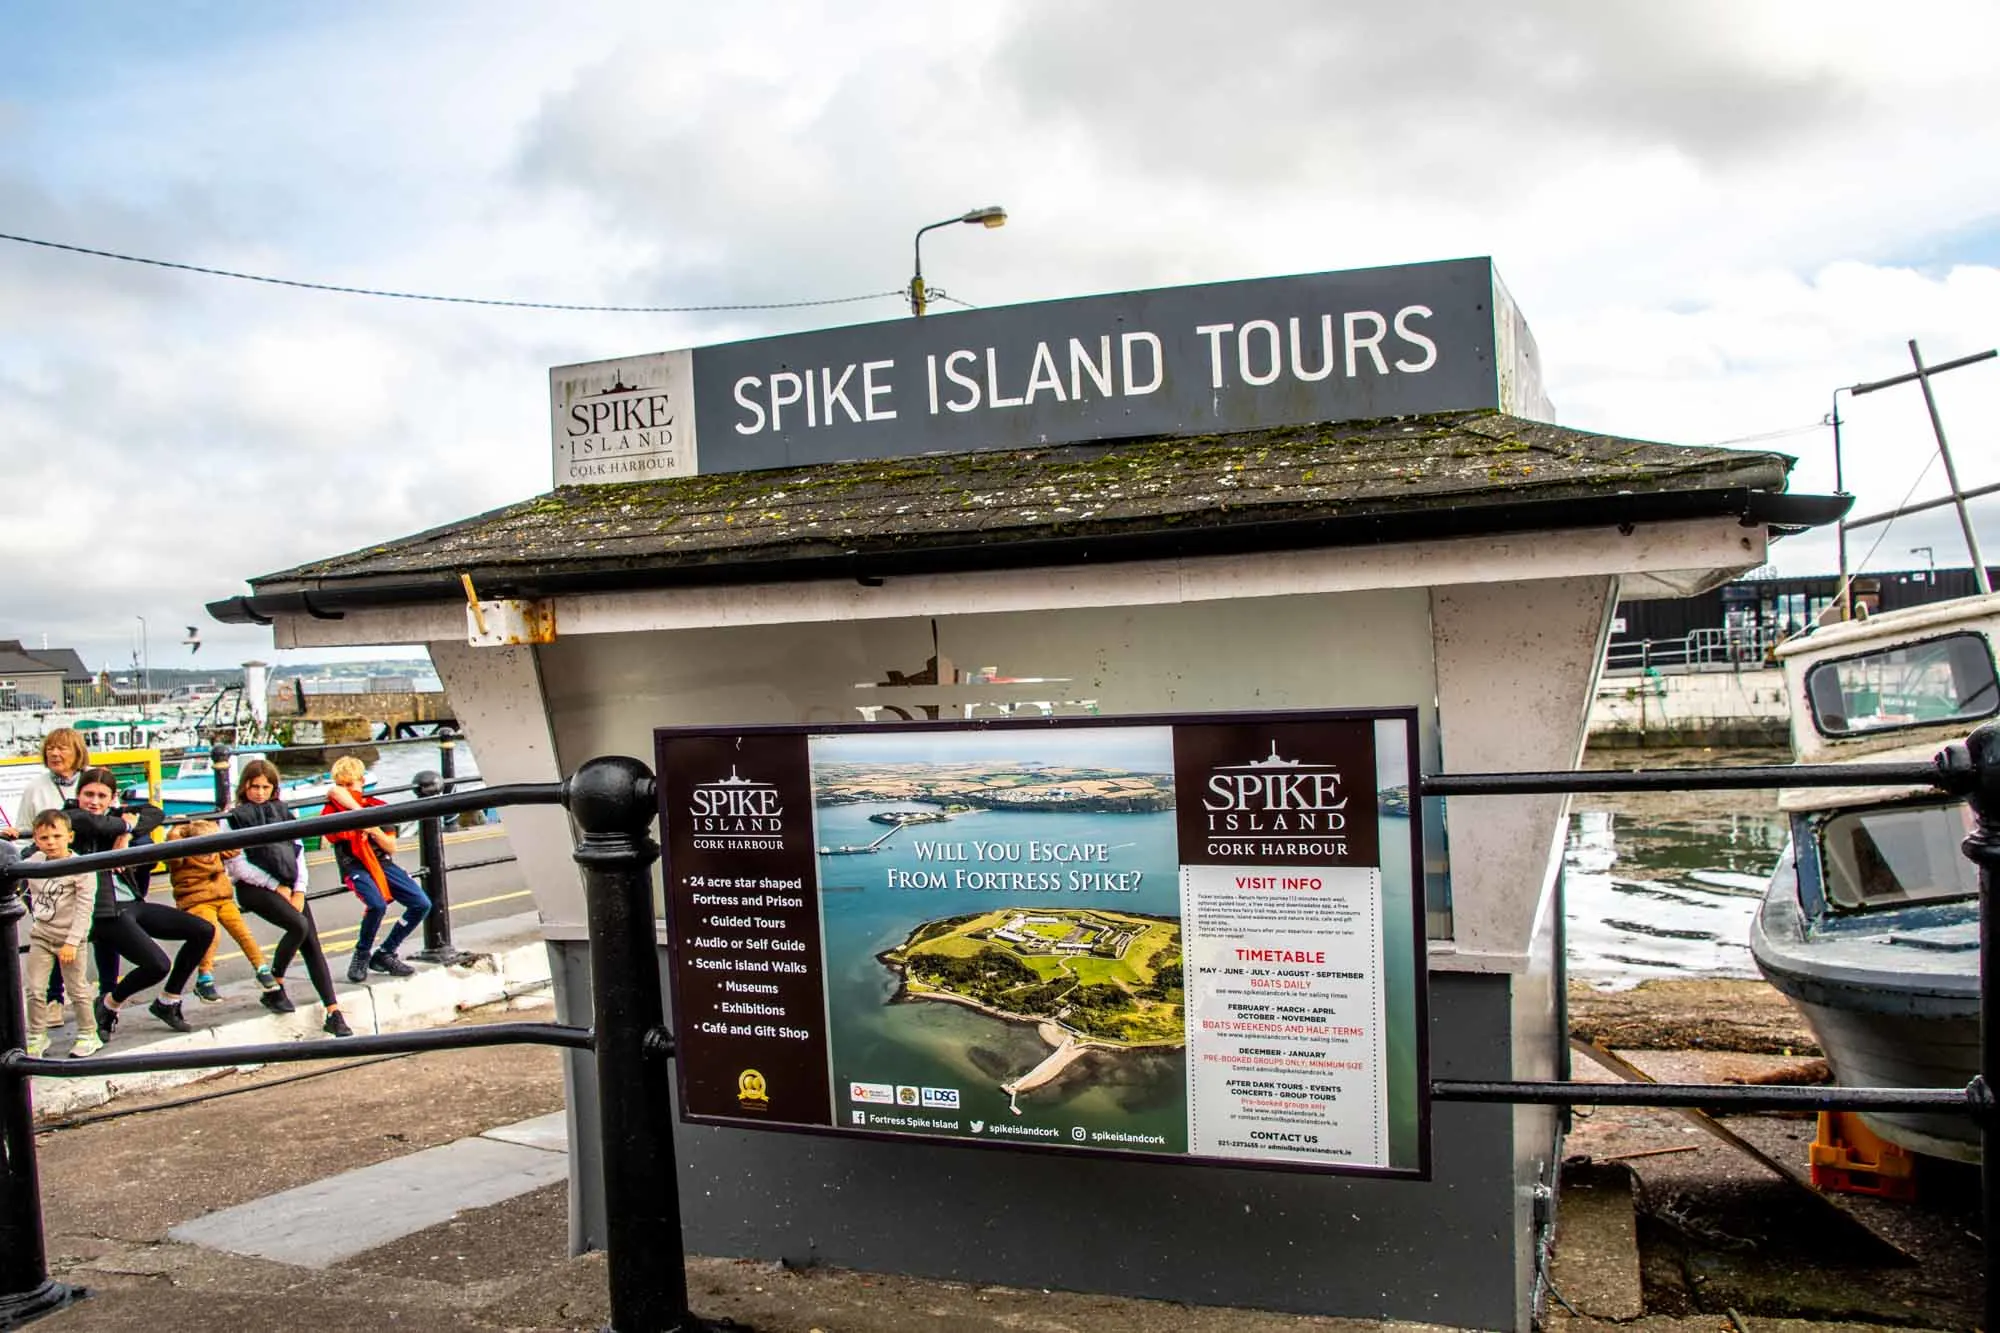 Kiosk with a sign for "Spike Island tours" and advertisement for the tours